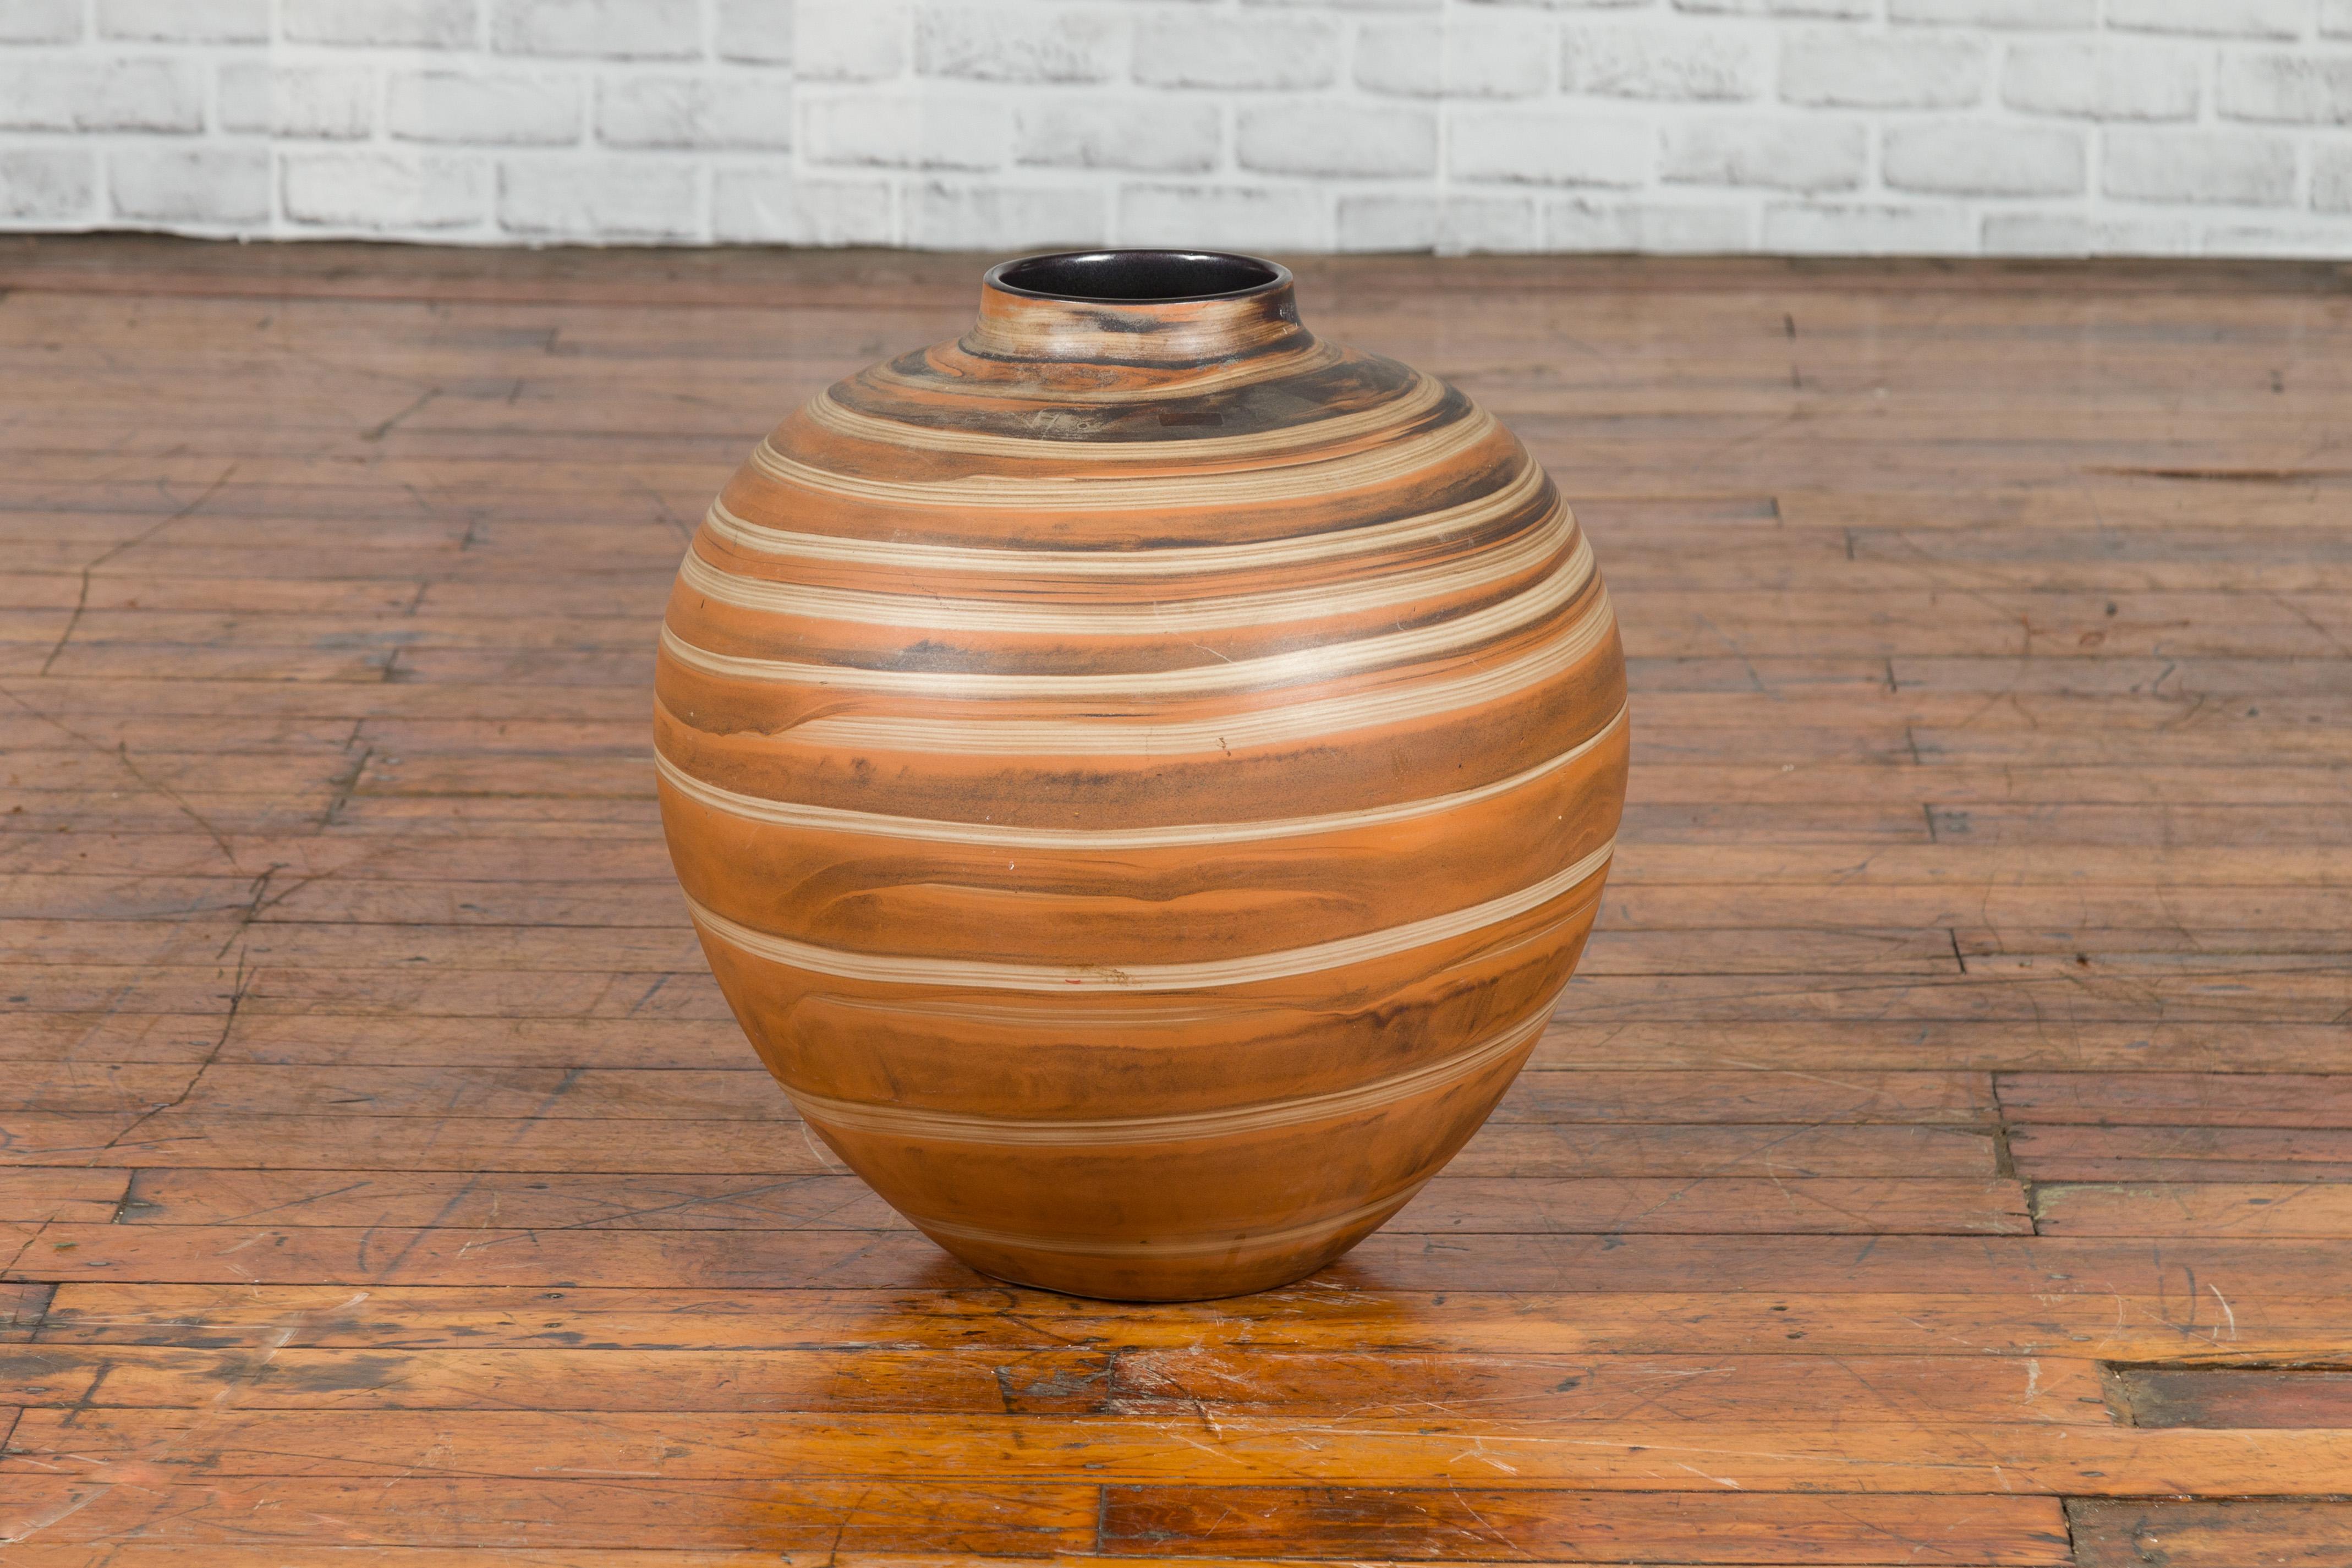 A vintage Thai Prem Collection jar from the mid-20th century from Chiang Mai with spiral decor. Created in Chiang Mai during the midcentury period, this vintage jar draws our attention with its spiral decor whose lighter hue contrasts beautifully